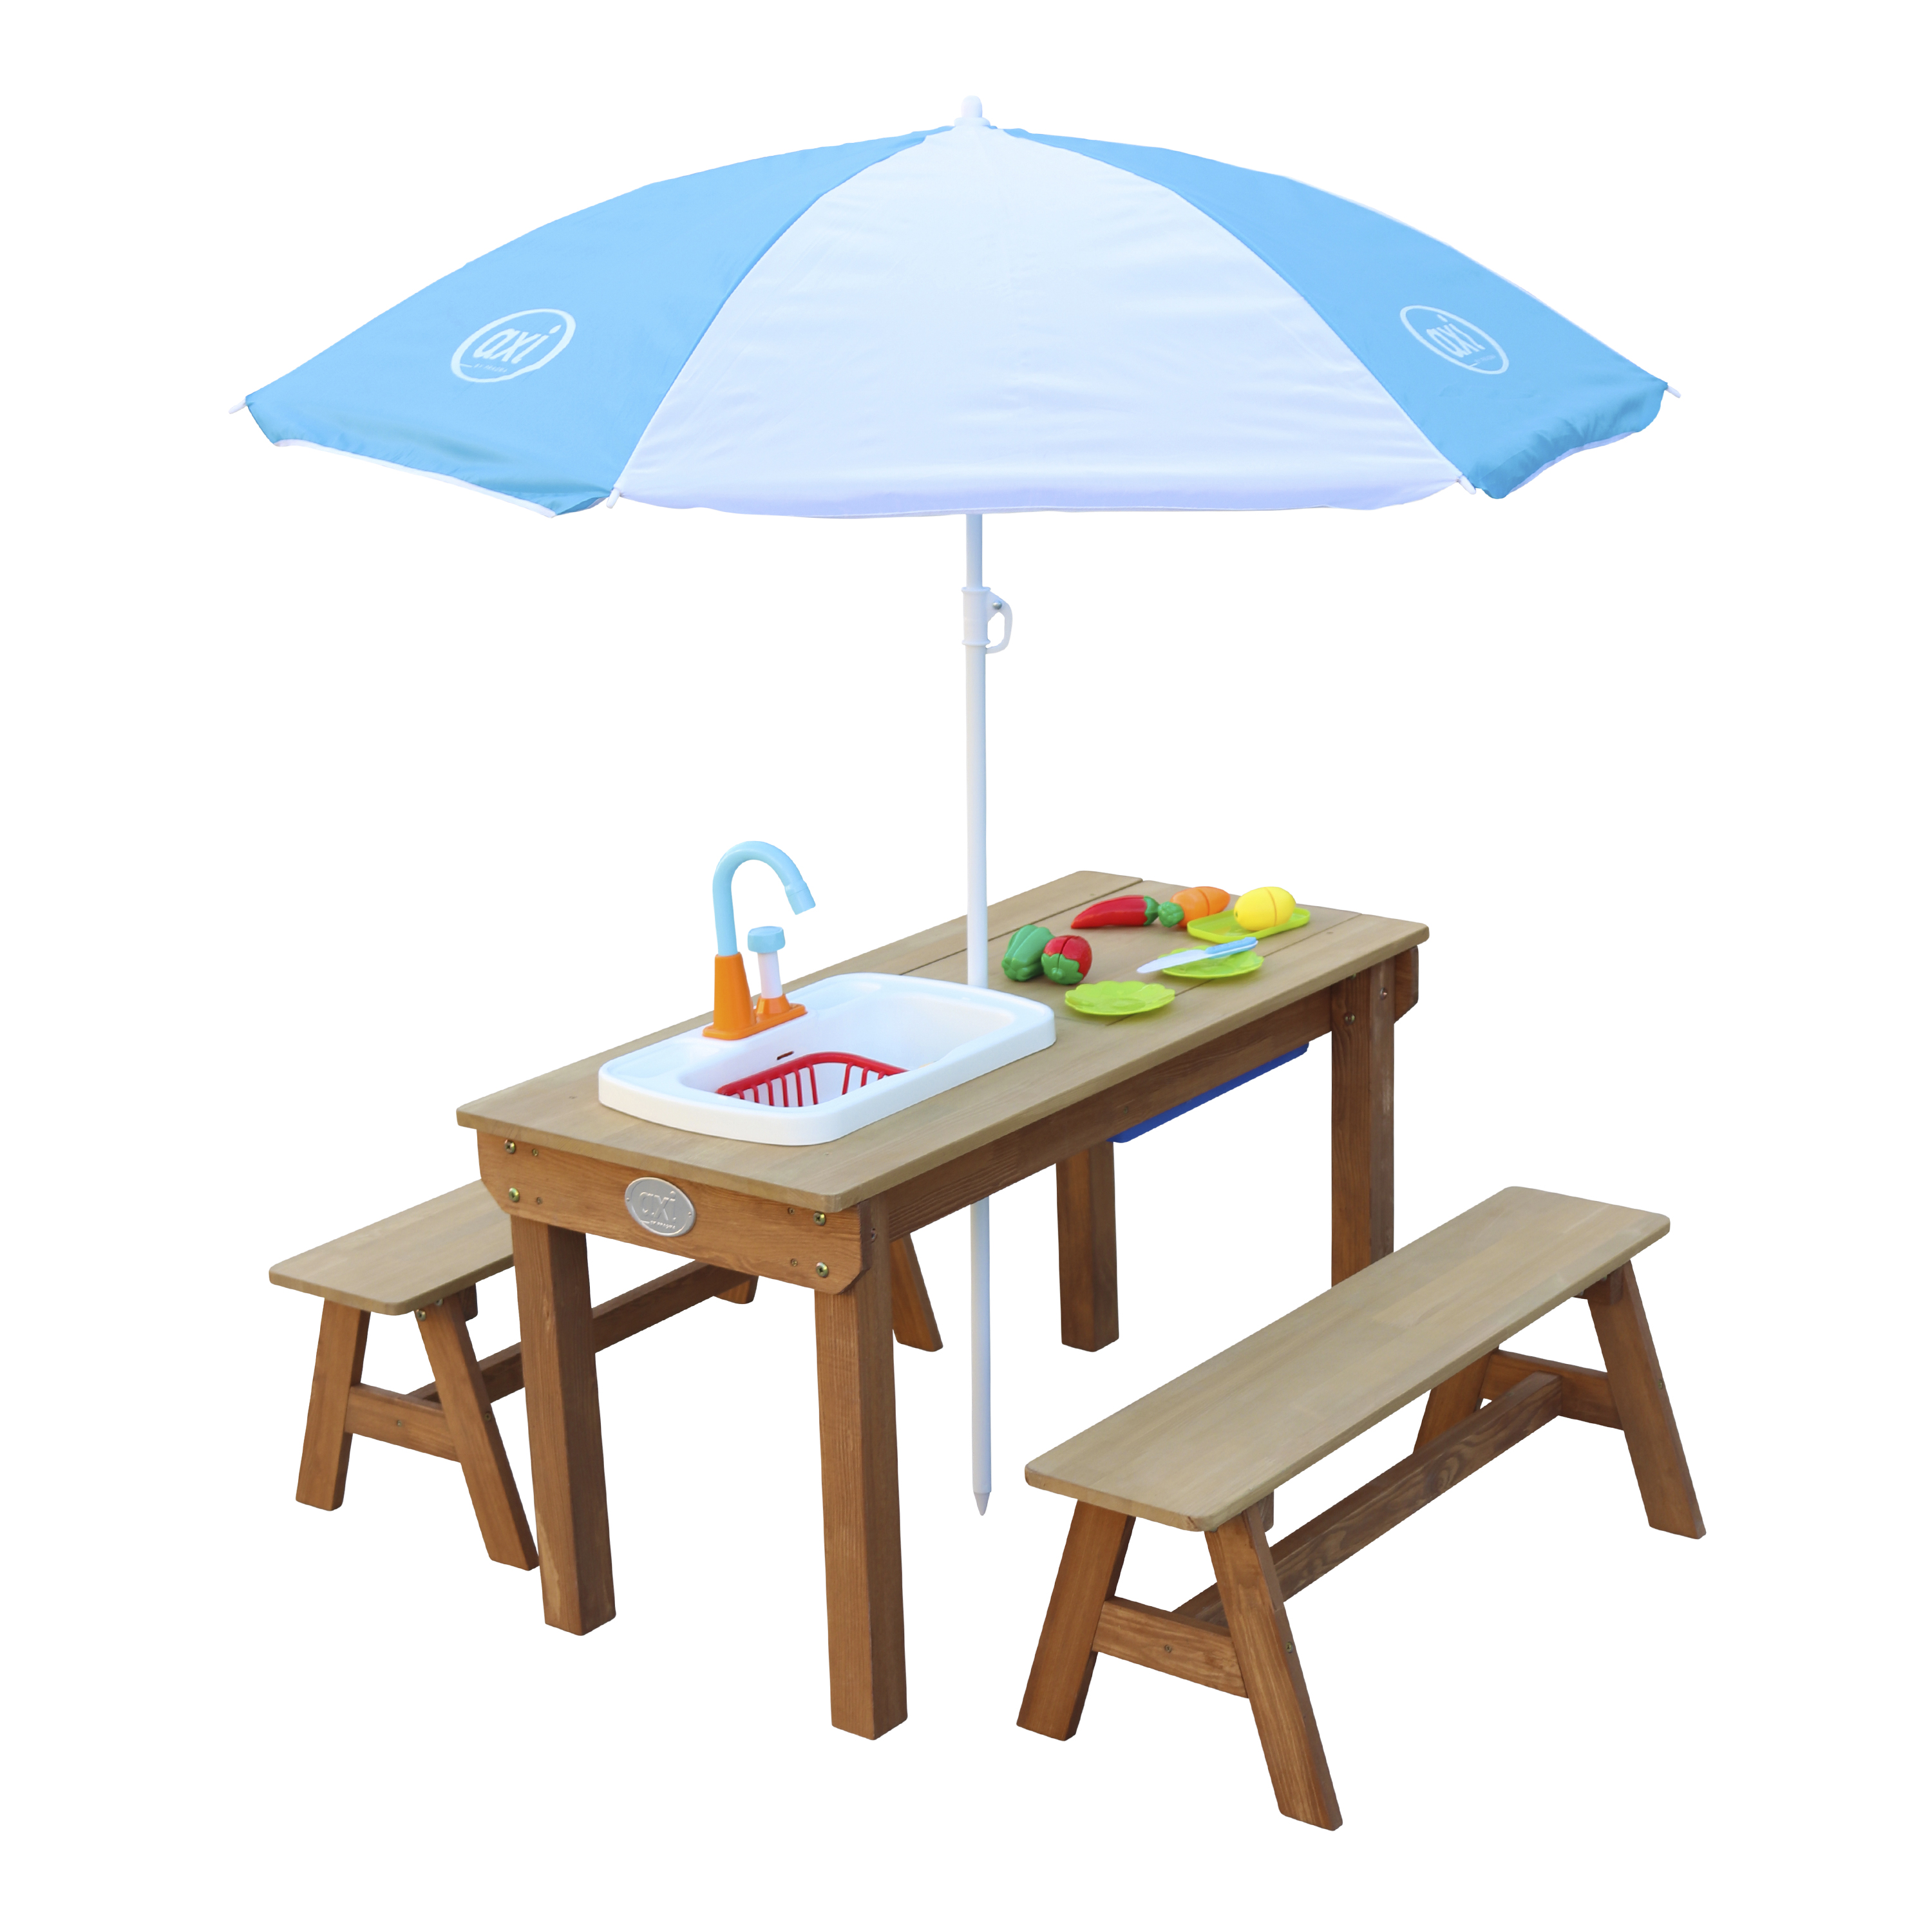 Dennis Sand & Water Picnic Table with Play Kitchen sink and Benches Brown - Umbrella Blue/White